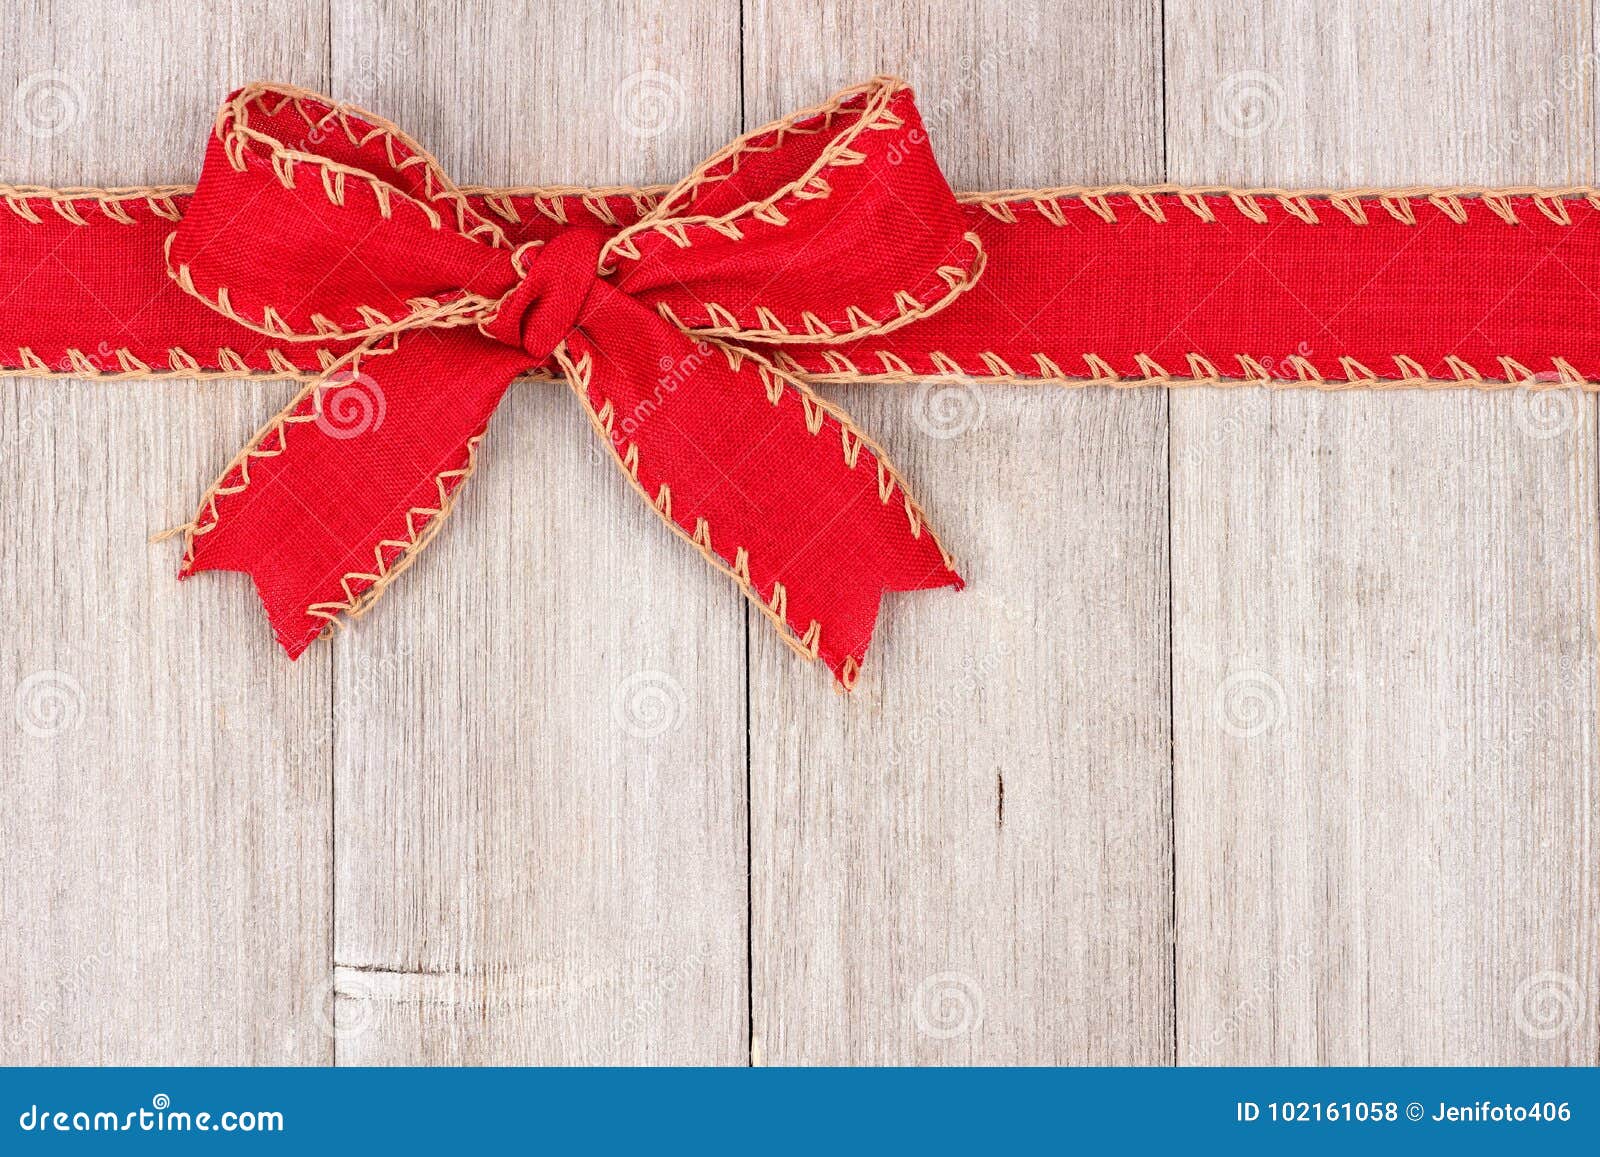 Red Christmas Bow and Ribbon Top Border on Old White Wood Stock Photo -  Image of decor, celebration: 102161058